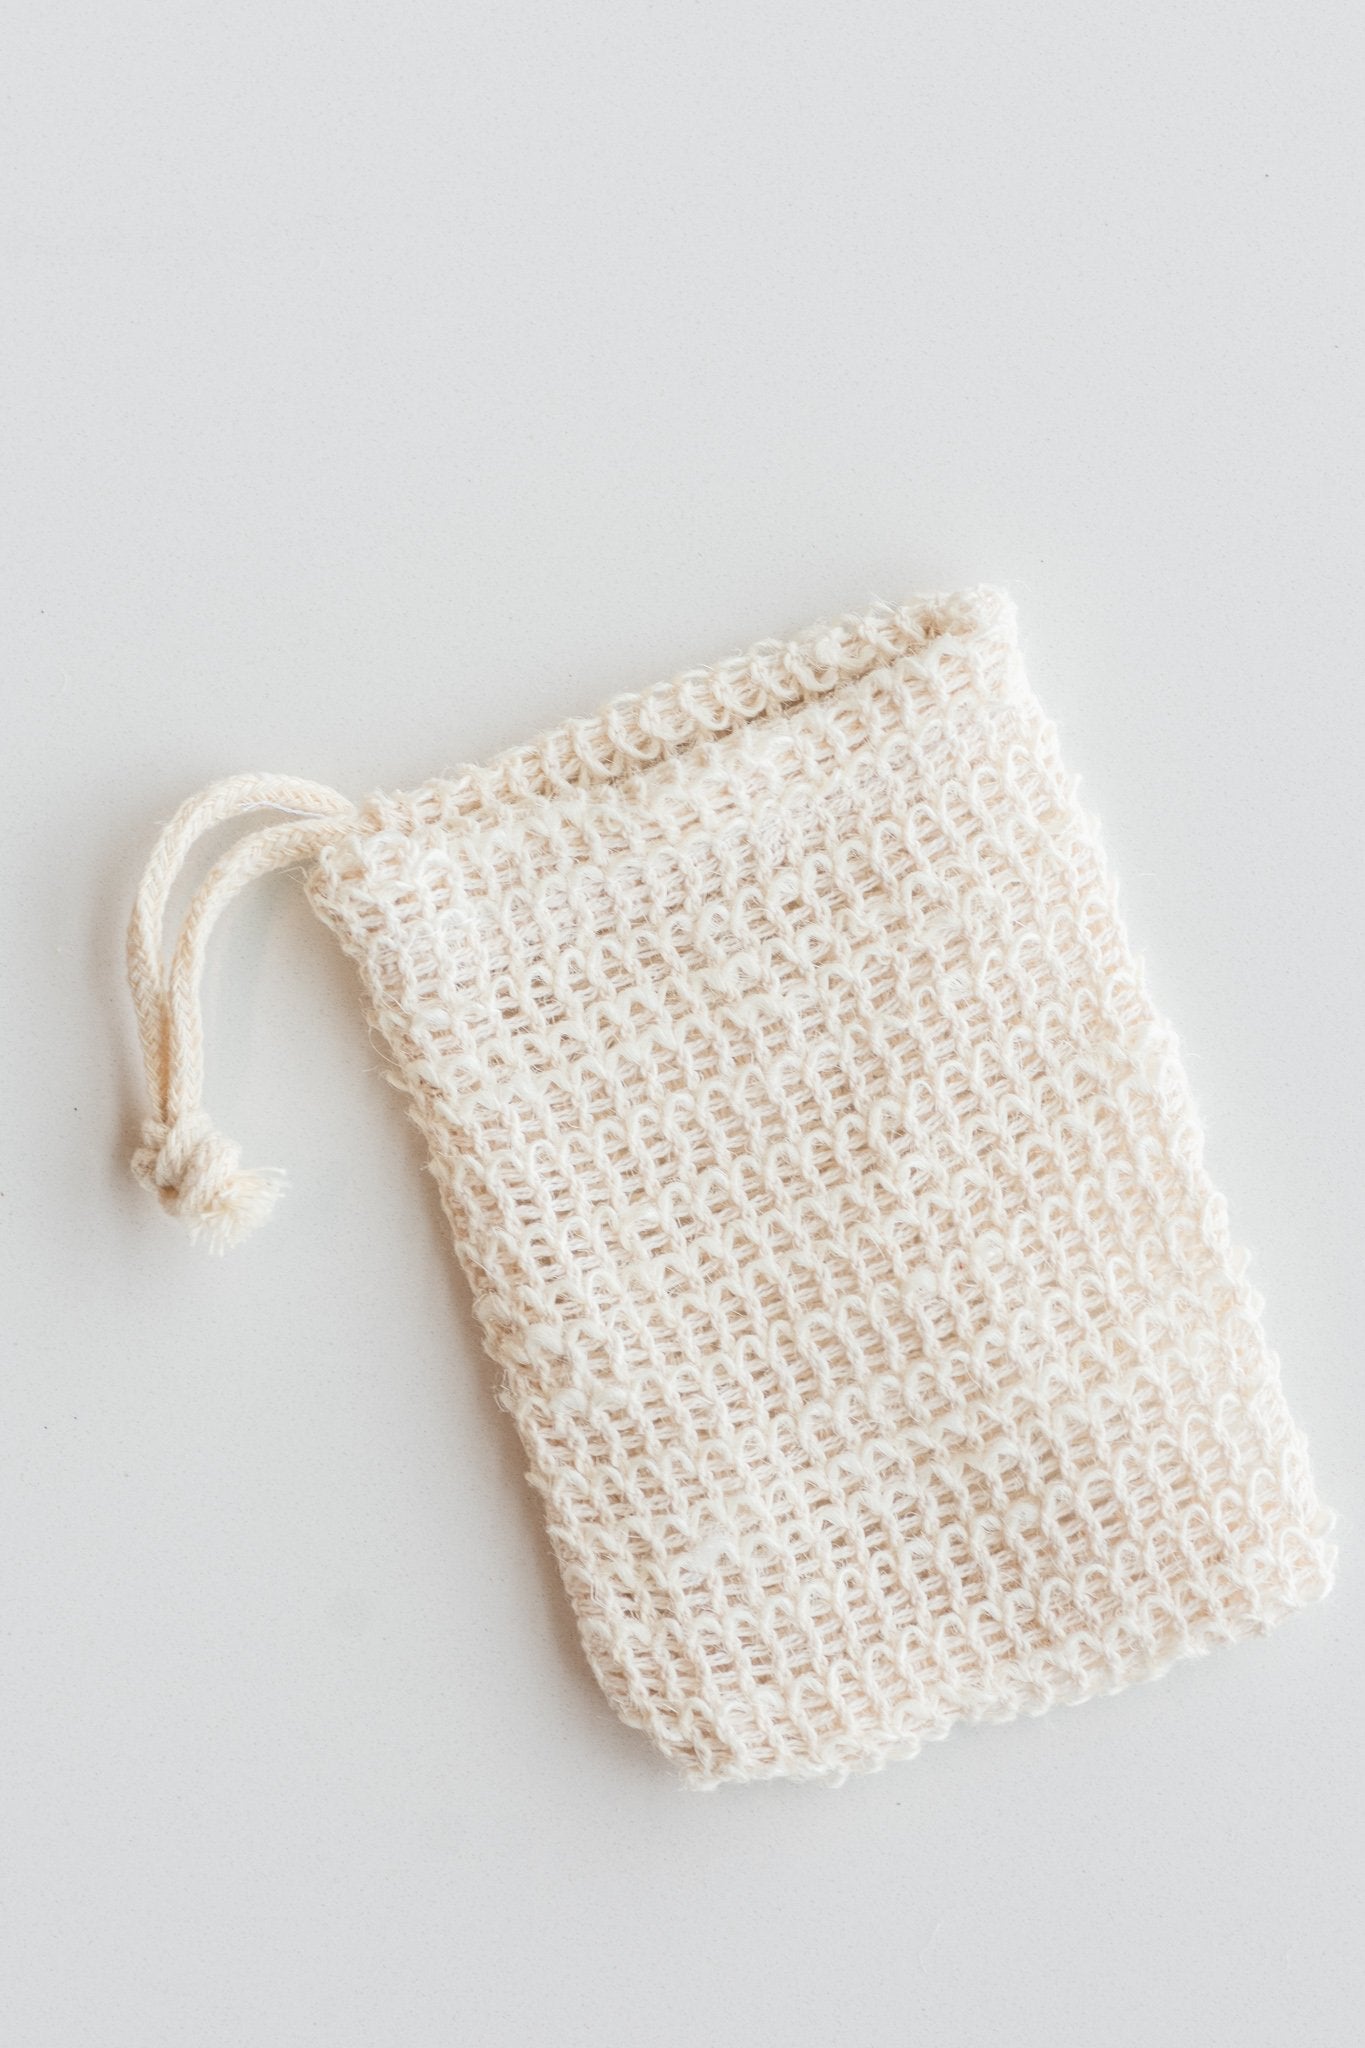 CASA AGAVE® Woven Soap Bag - Exfoliating Scrubber - Set of 3